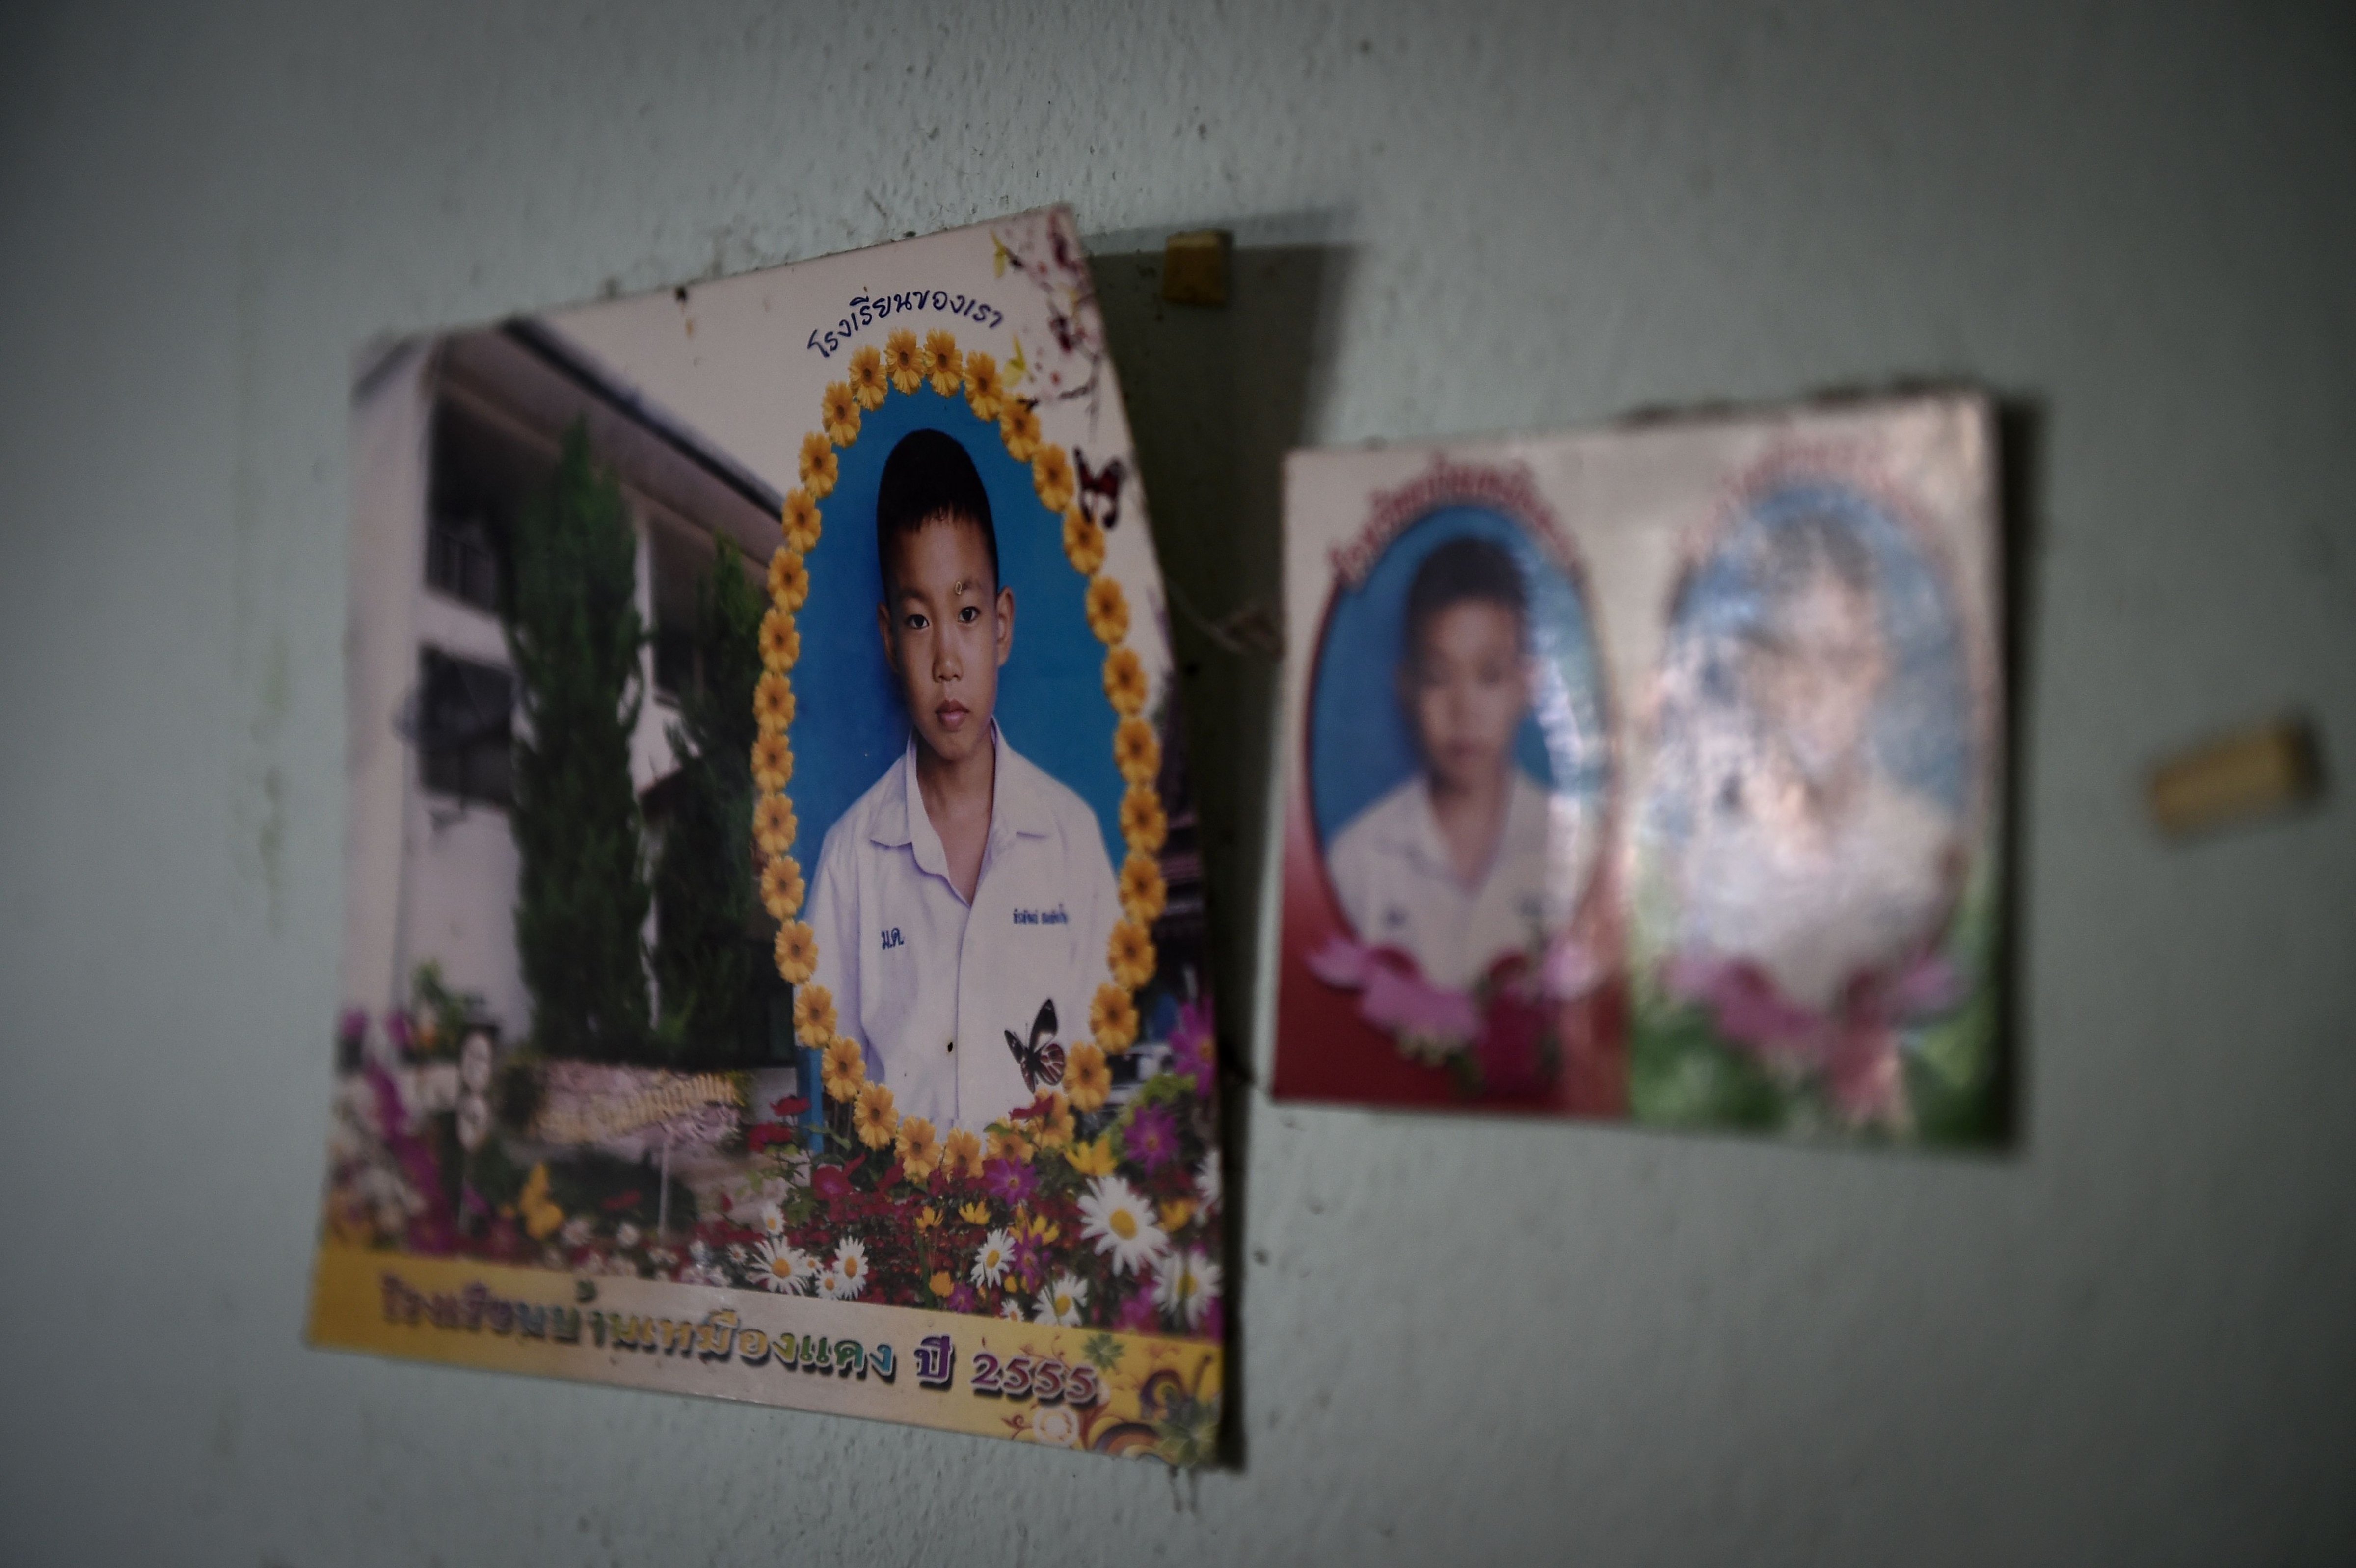 Photographs of Pheeraphat 'Night' Sompiengjai, one of the members of a Thai youth football team currently trapped at the Tham Luang cave, are seen on a wall at his home in Mae Sai on July 4, 2018. (Lillian Suwanrumpha—AFP/Getty Images)